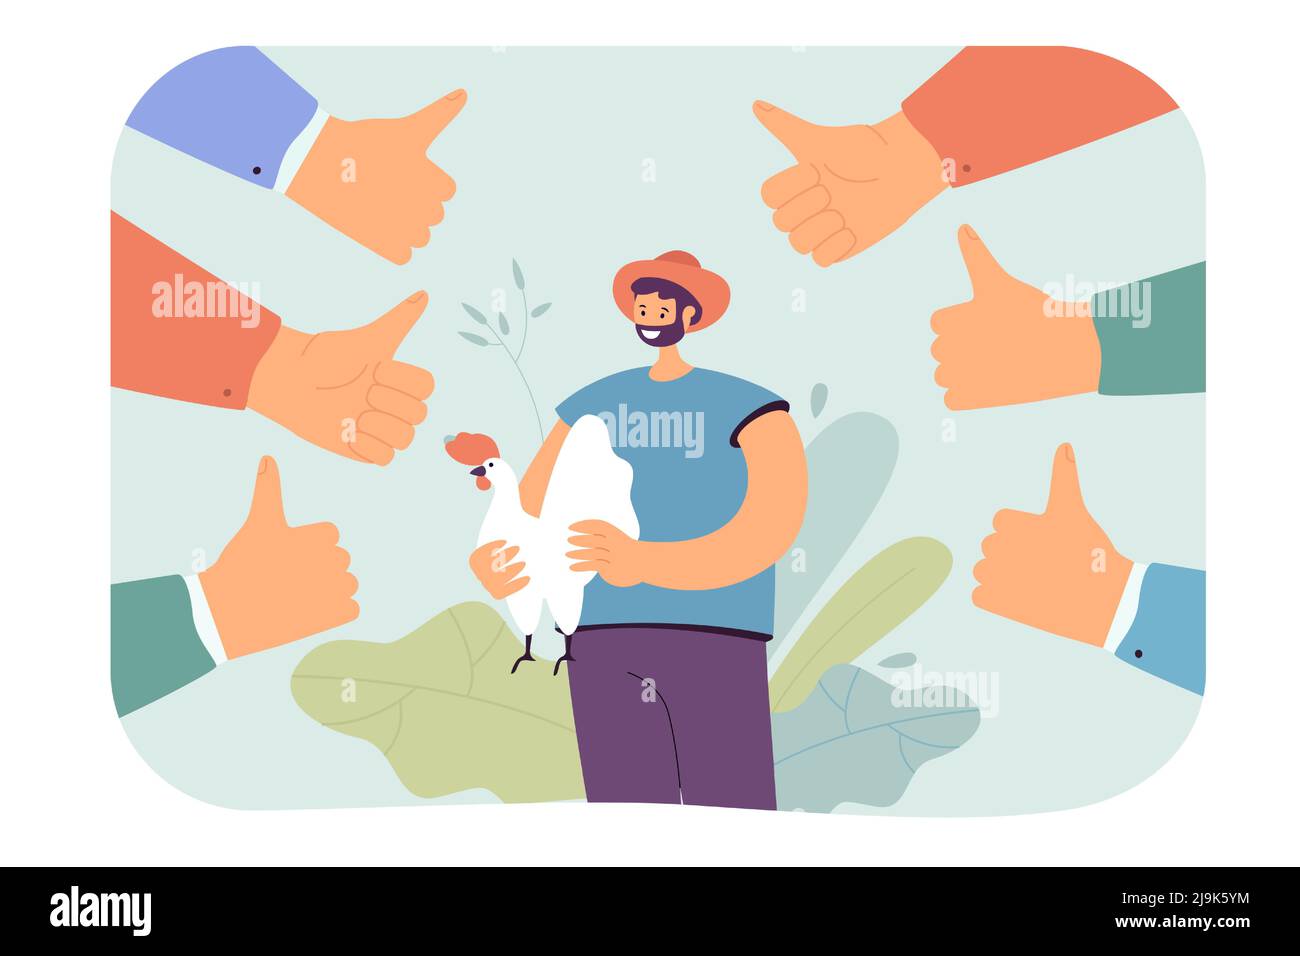 Farmer with rooster surrounded by thumbs up. Smiling man in hat getting public approval flat vector illustration. Occupation, public opinion concept f Stock Vector